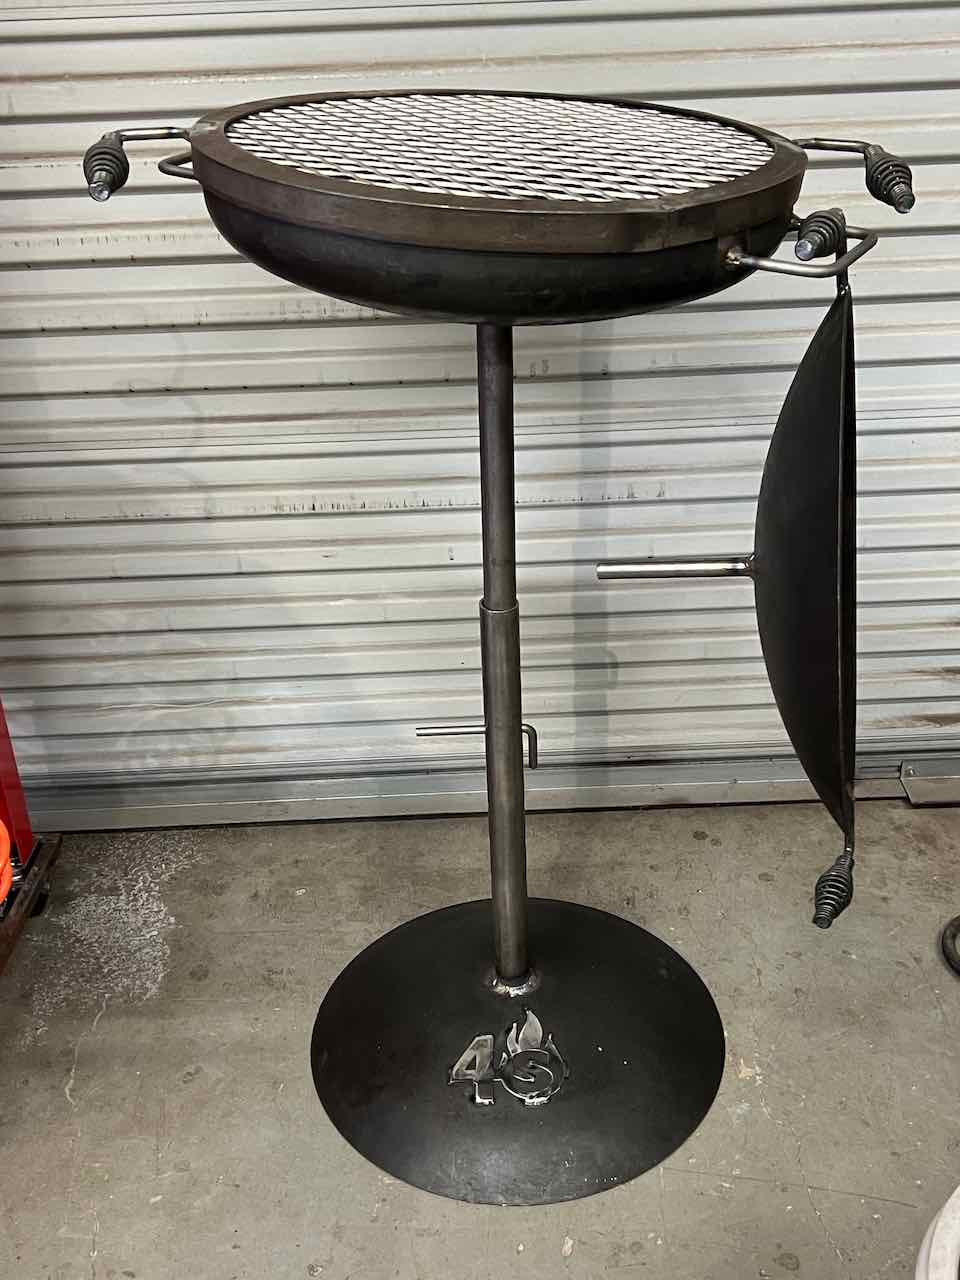 Live Fire Disc & Grill Combo